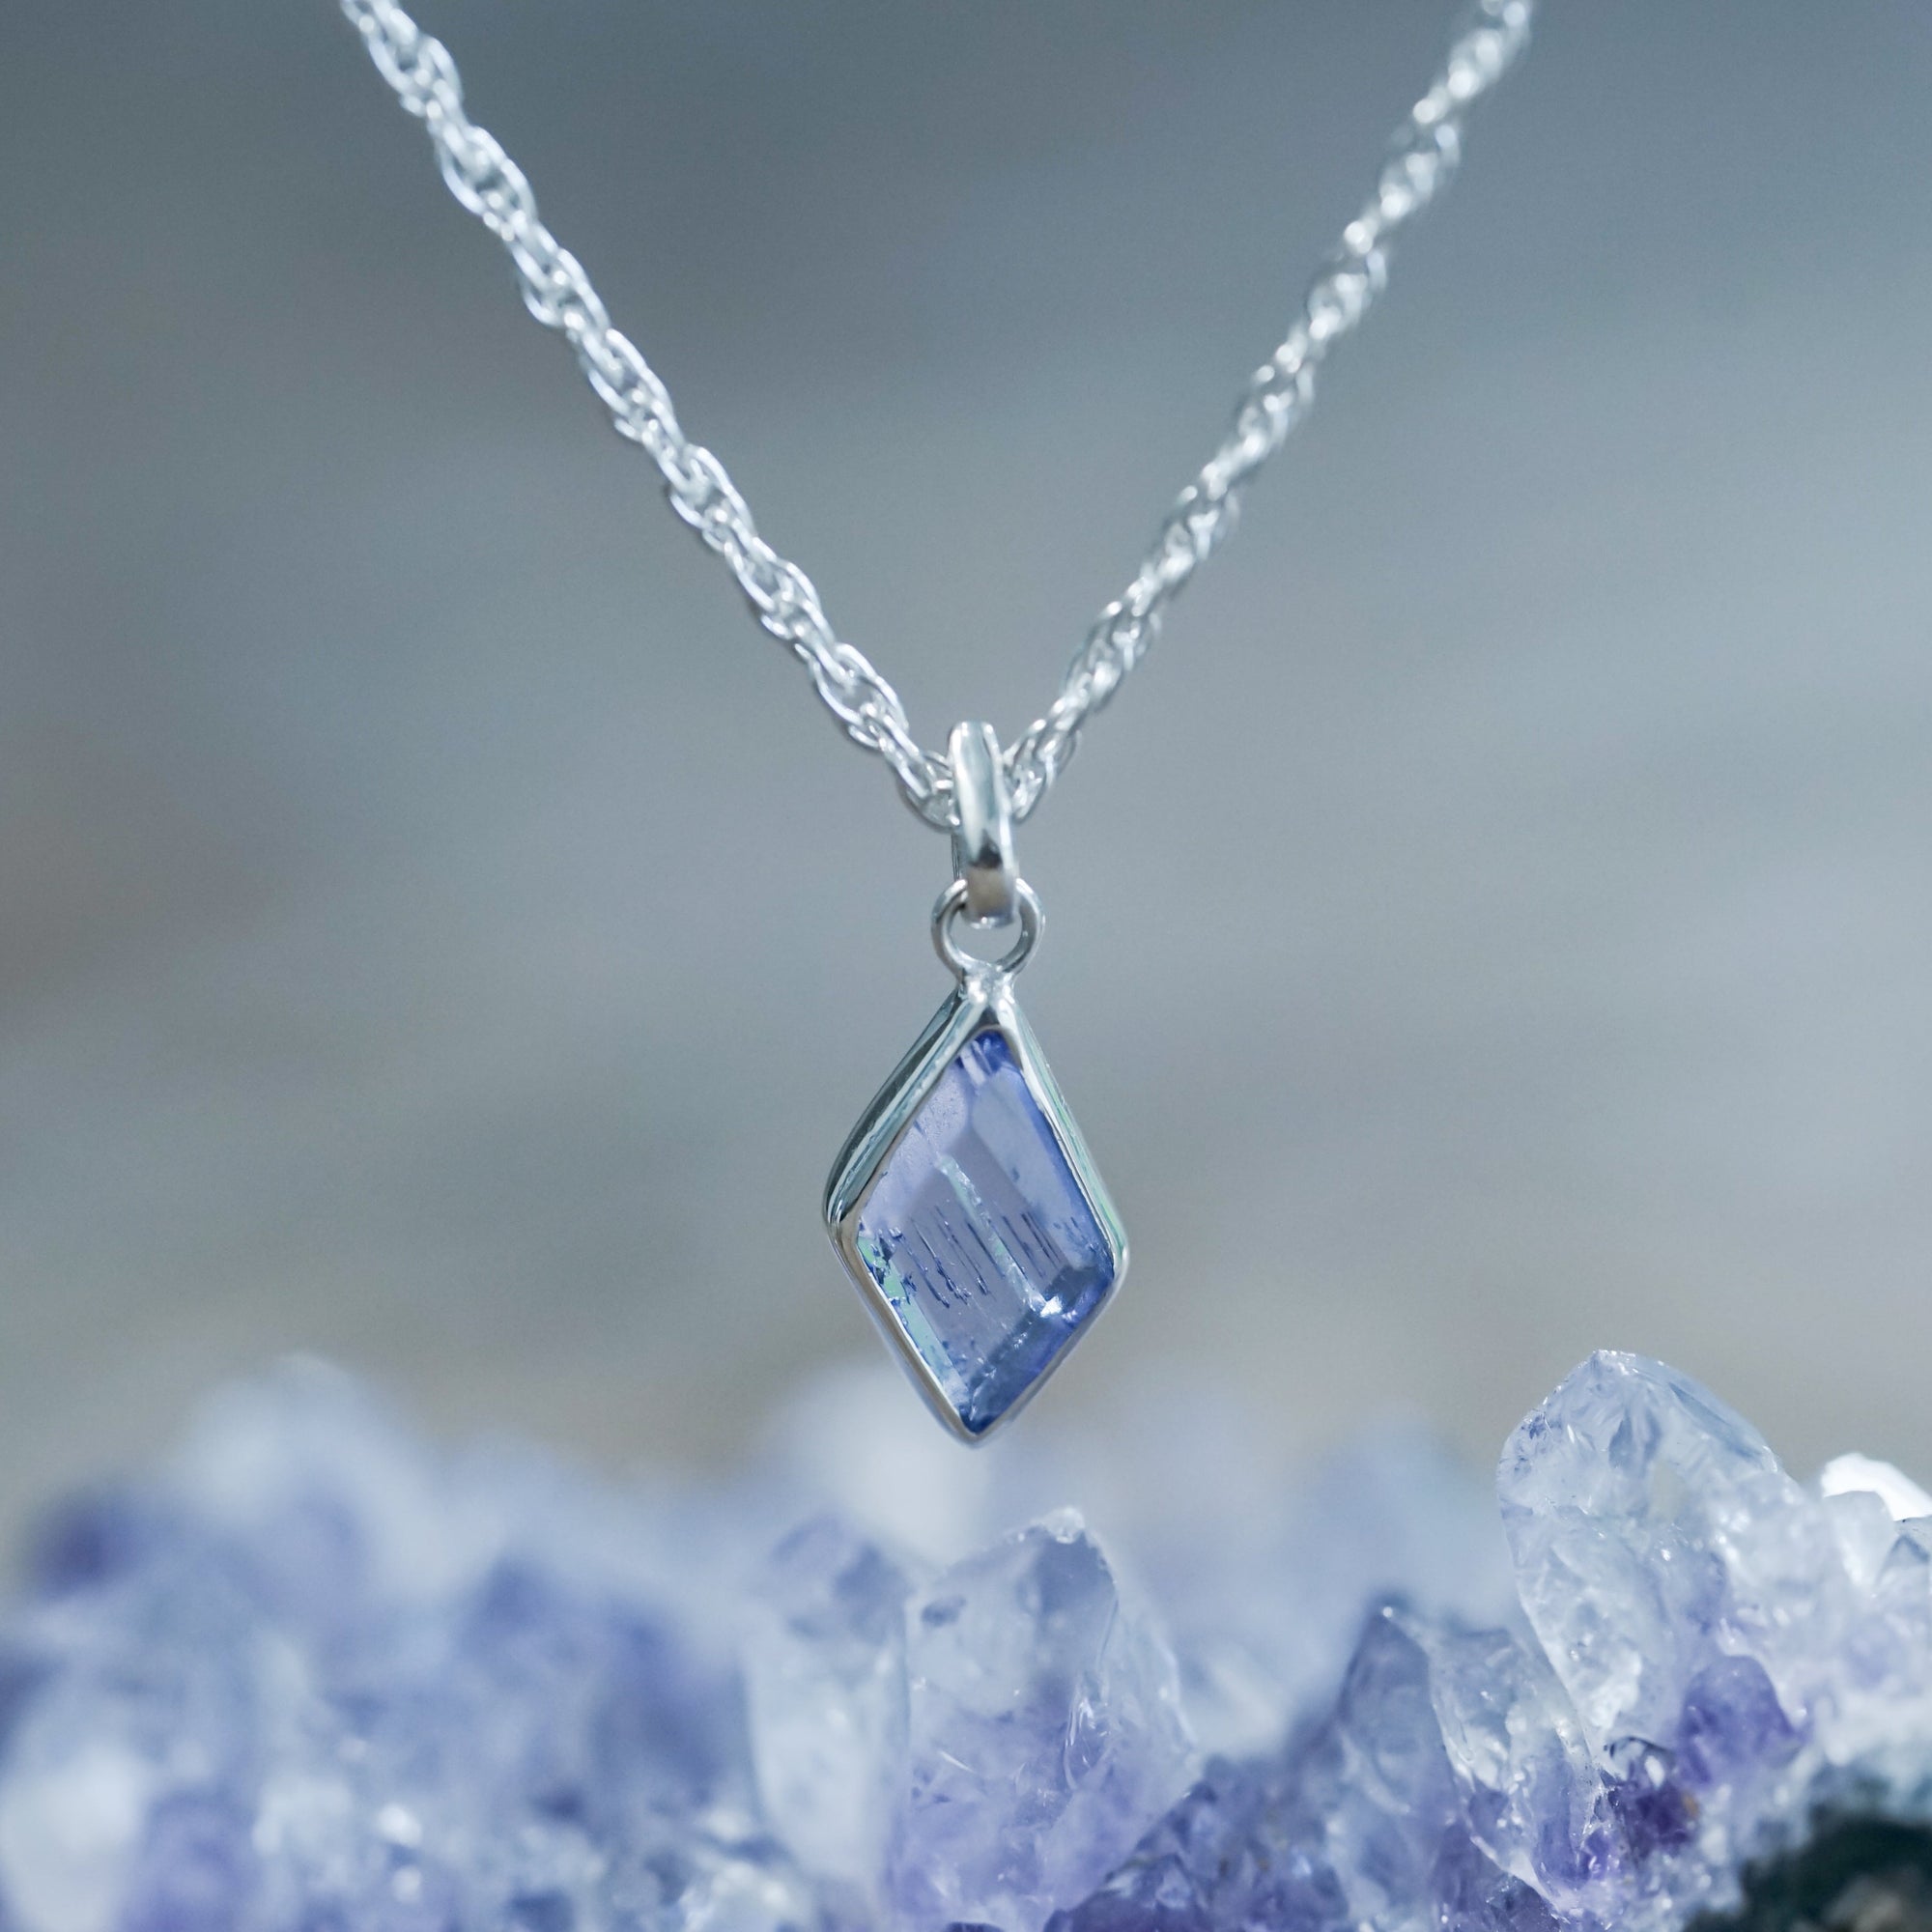 Geometric Tanzanite Necklace - Gardens of the Sun | Ethical Jewelry